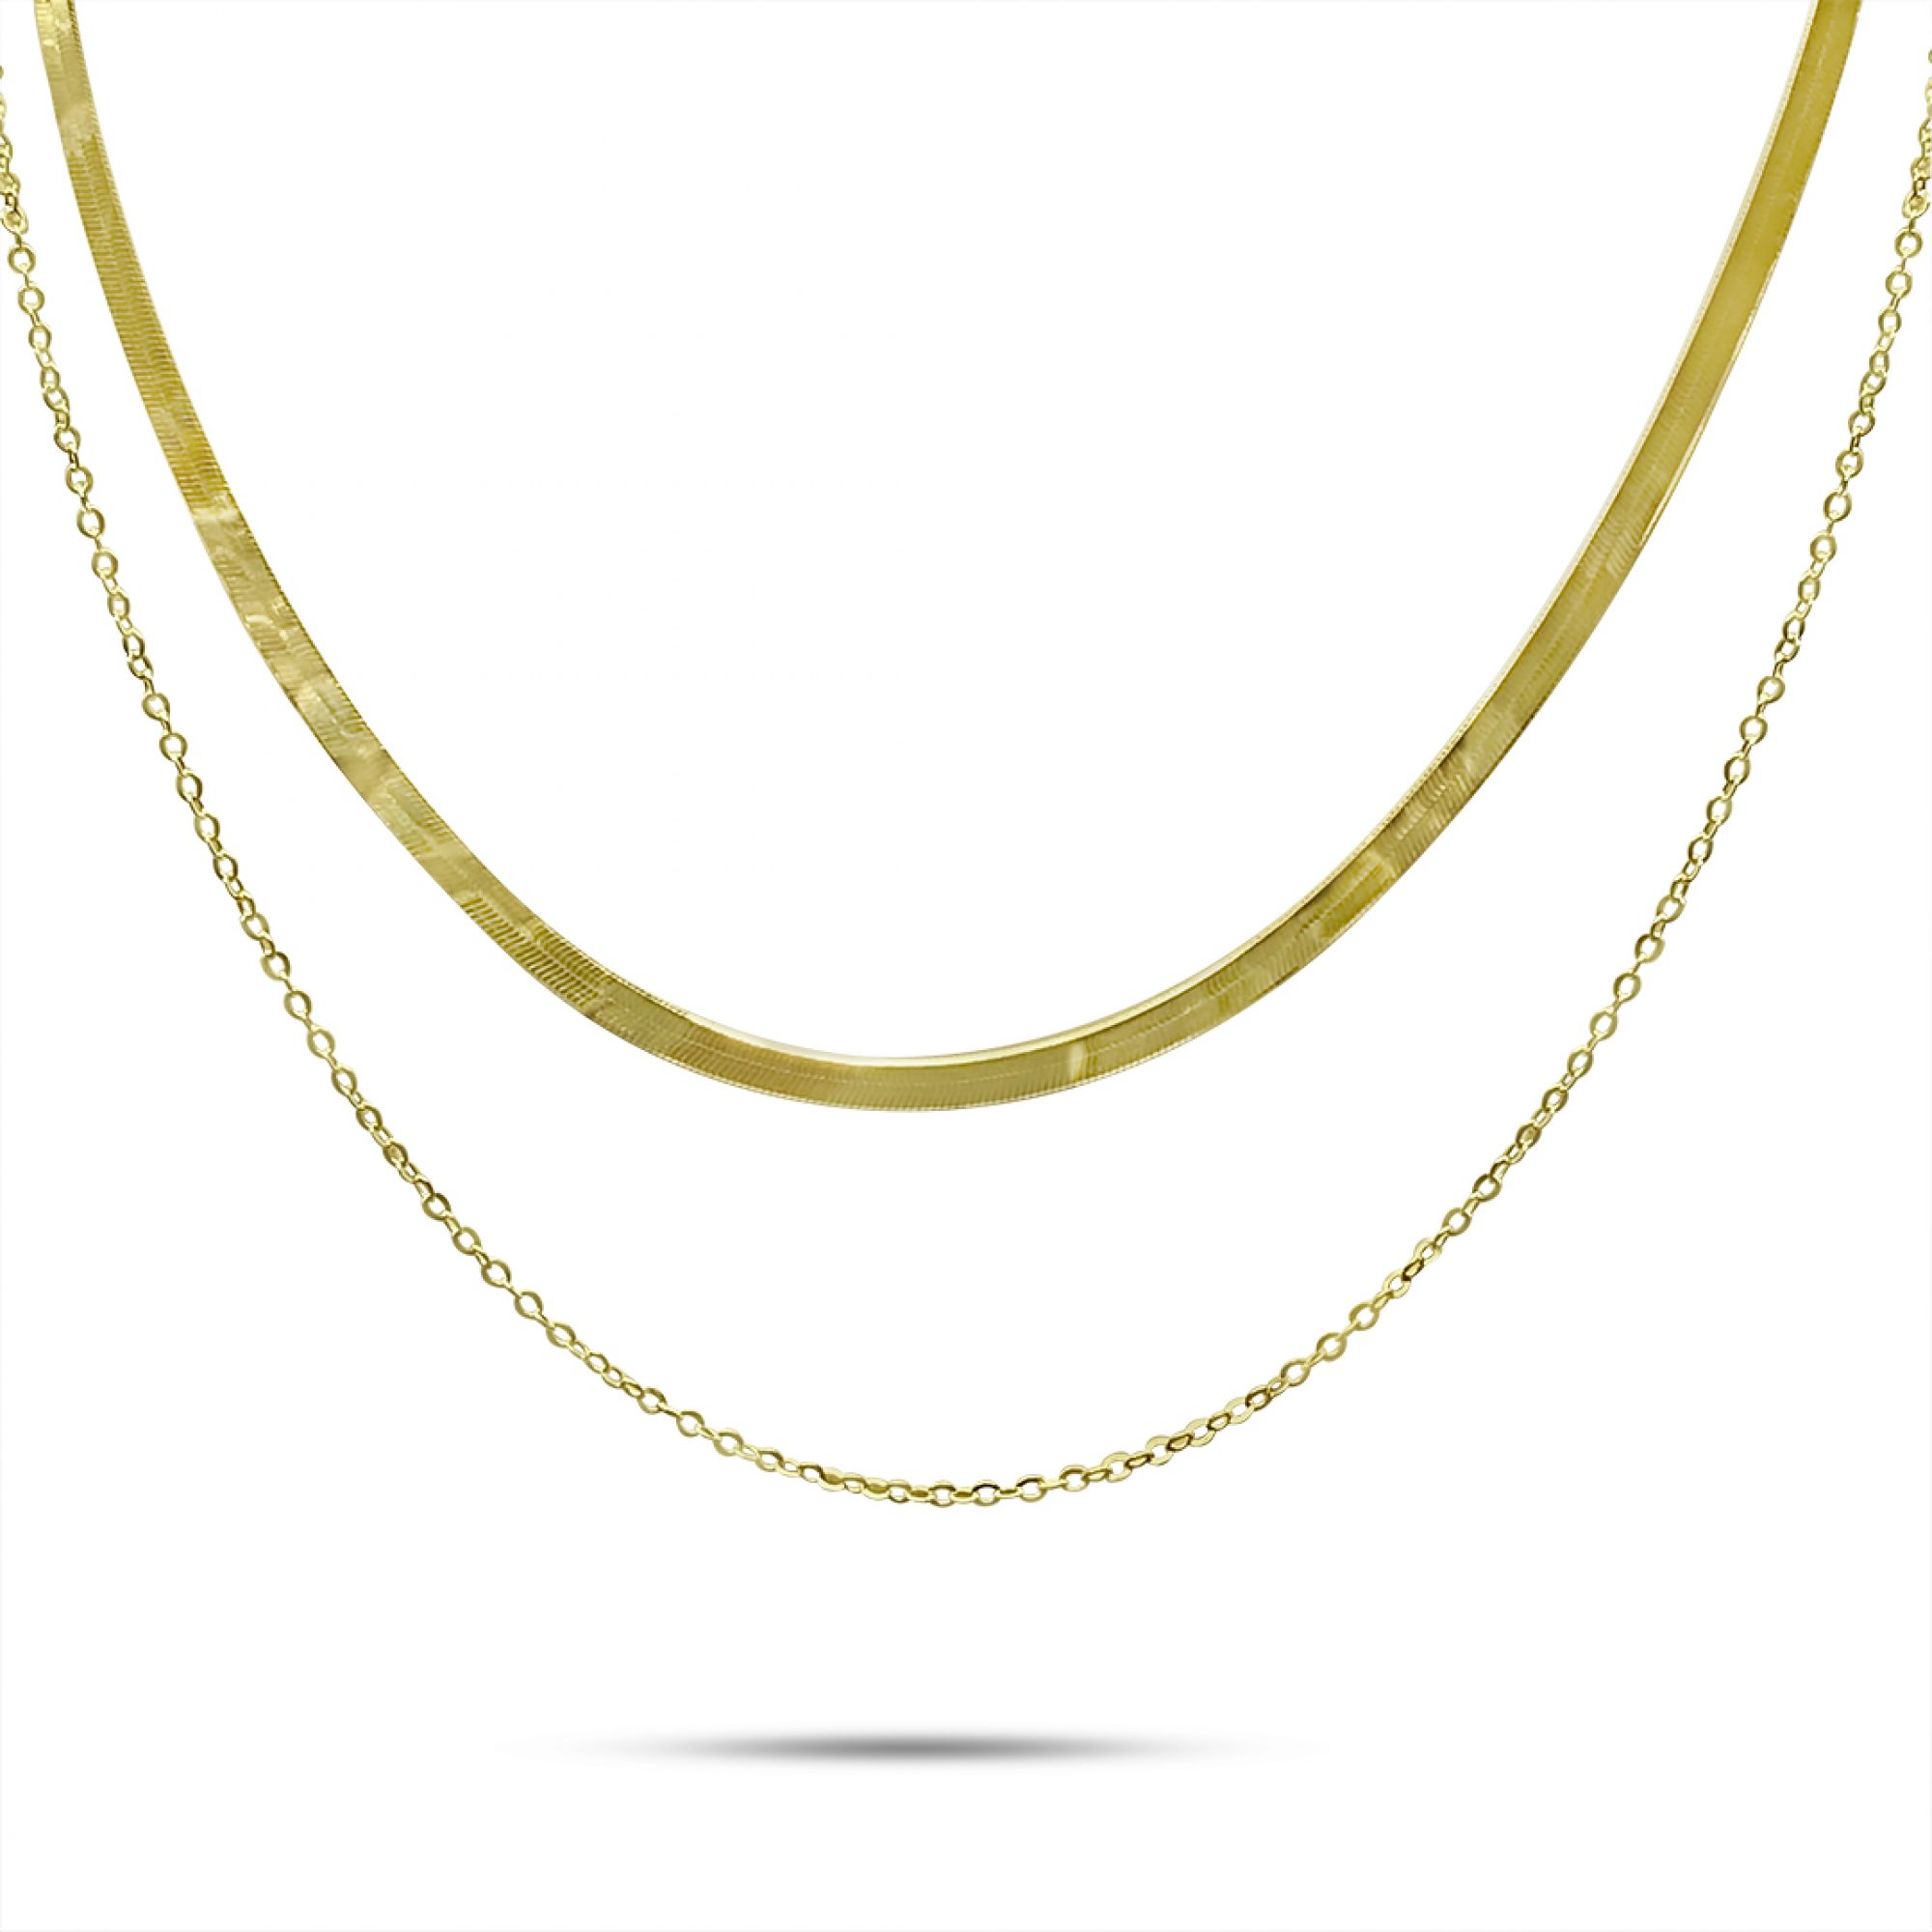 Double gold plated chain necklace